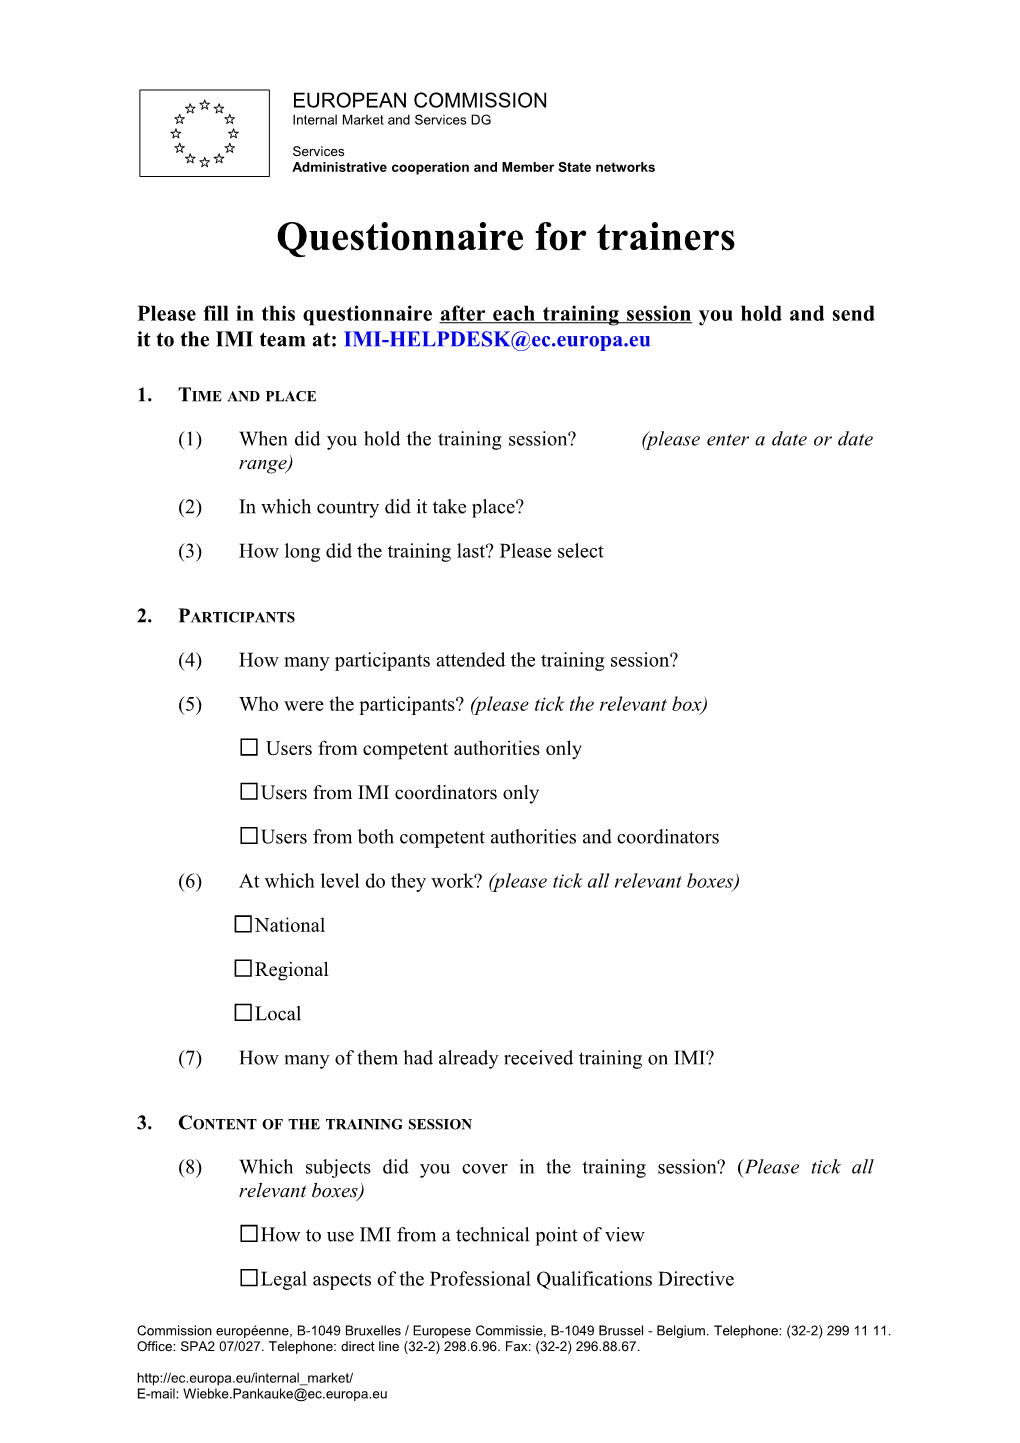 Questionnaire for Trainers